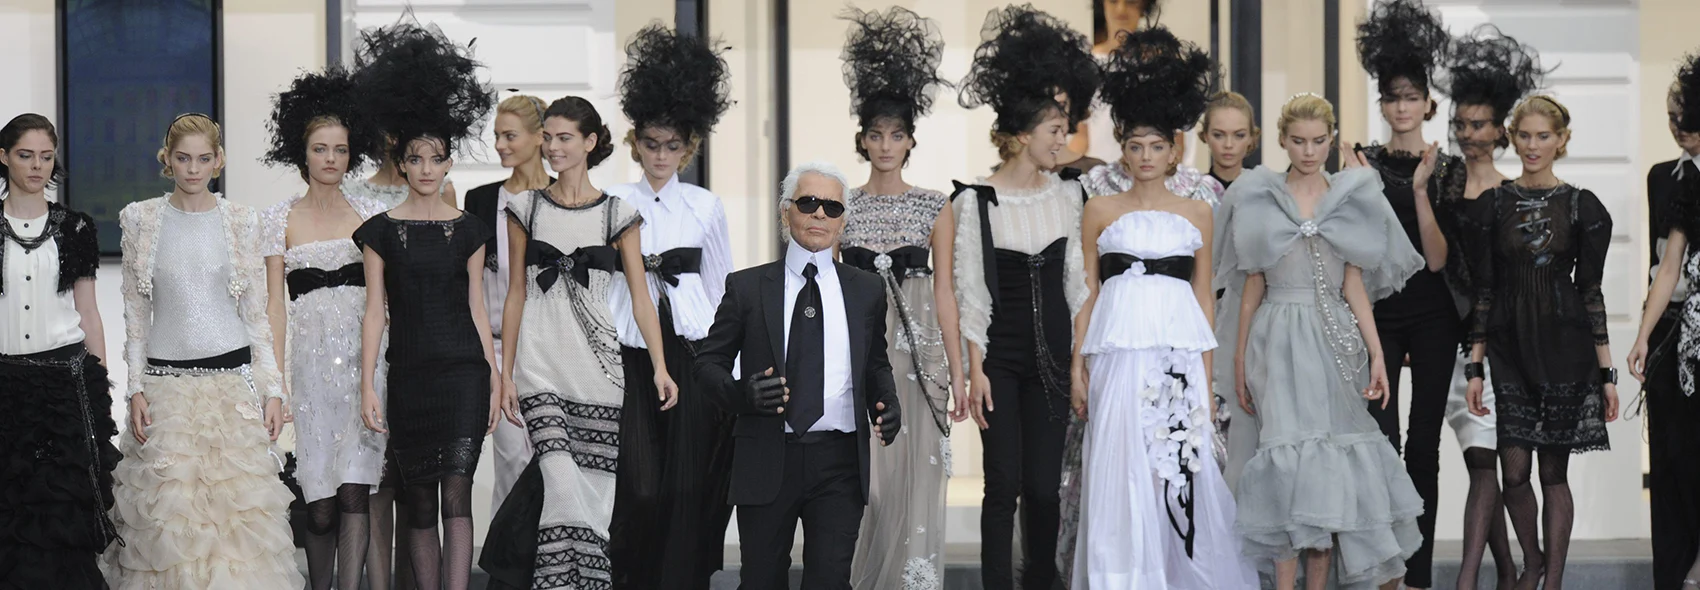 Karl Lagerfeld’s Life Through Design and Legacy